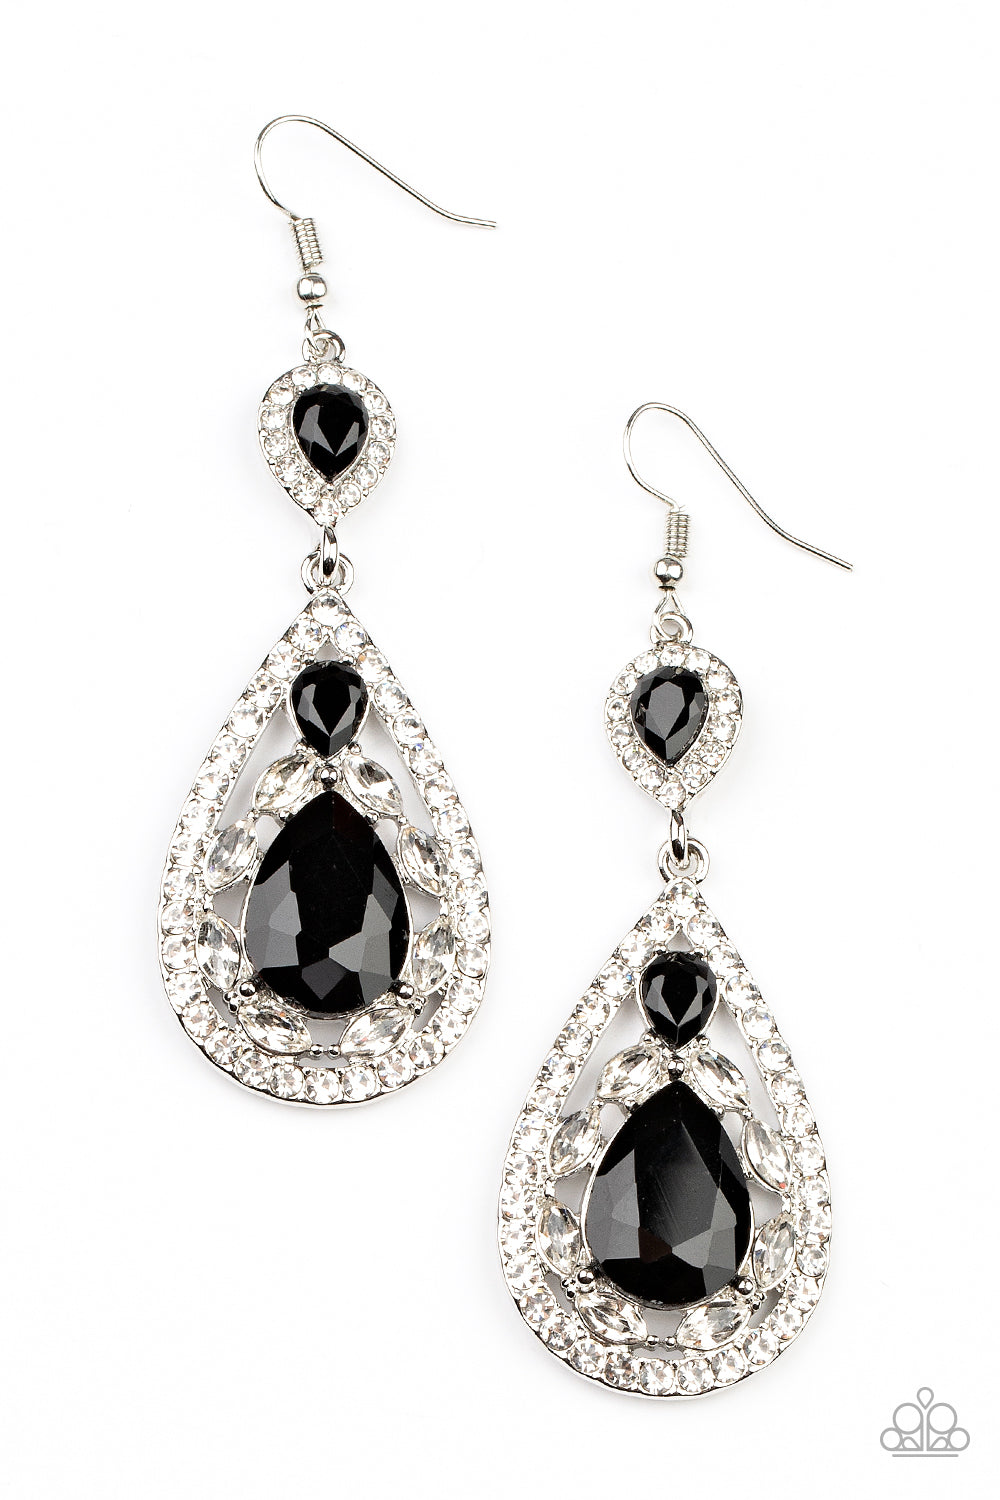 Posh Pageantry Black Earring - Paparazzi Accessories  Three teardrop black rhinestones adorn white rhinestone encrusted silver frames that link into an elegant teardrop lure for a flawless fashion. Earring attaches to a standard fishhook fitting.  Sold as one pair of earrings.